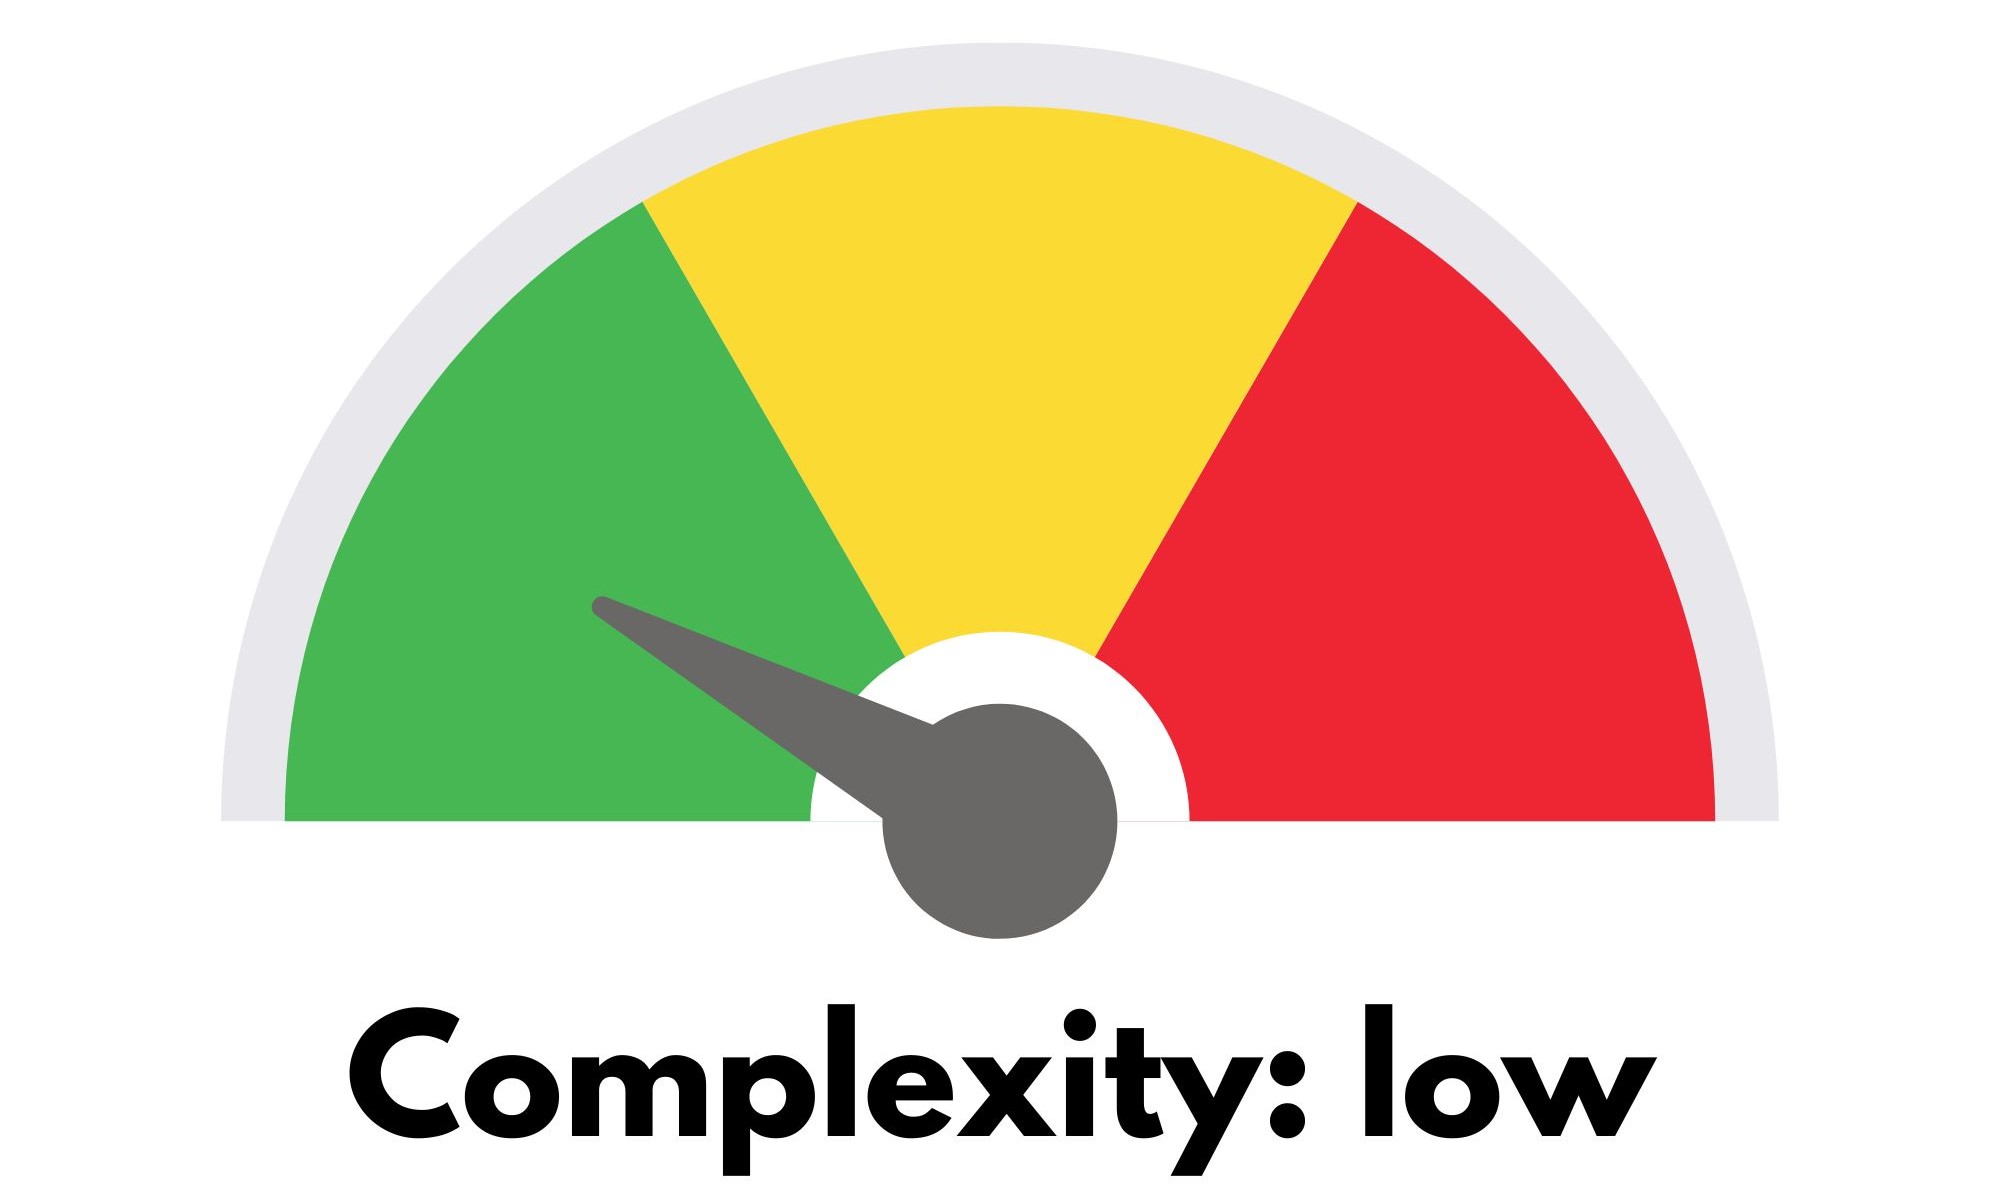 Low complexity